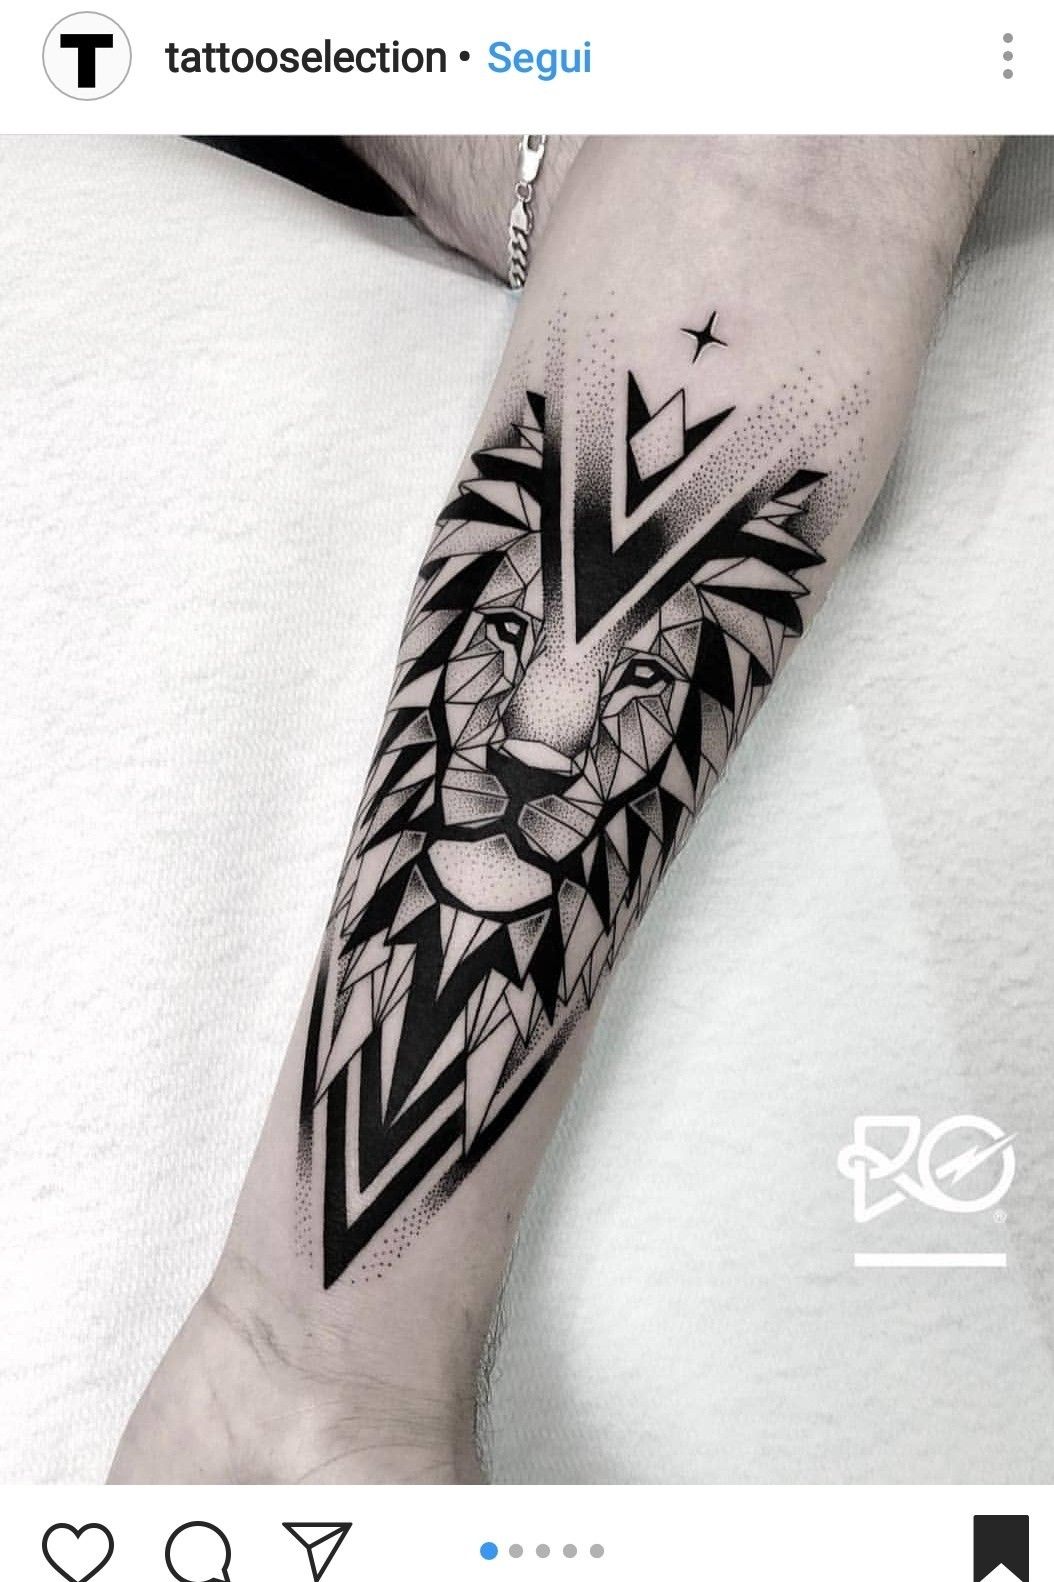 Jannes de Groot Tattoo   A collection of lion arm tattoos which one is  your favorite Let me know in the comment section down below  To get more  information about